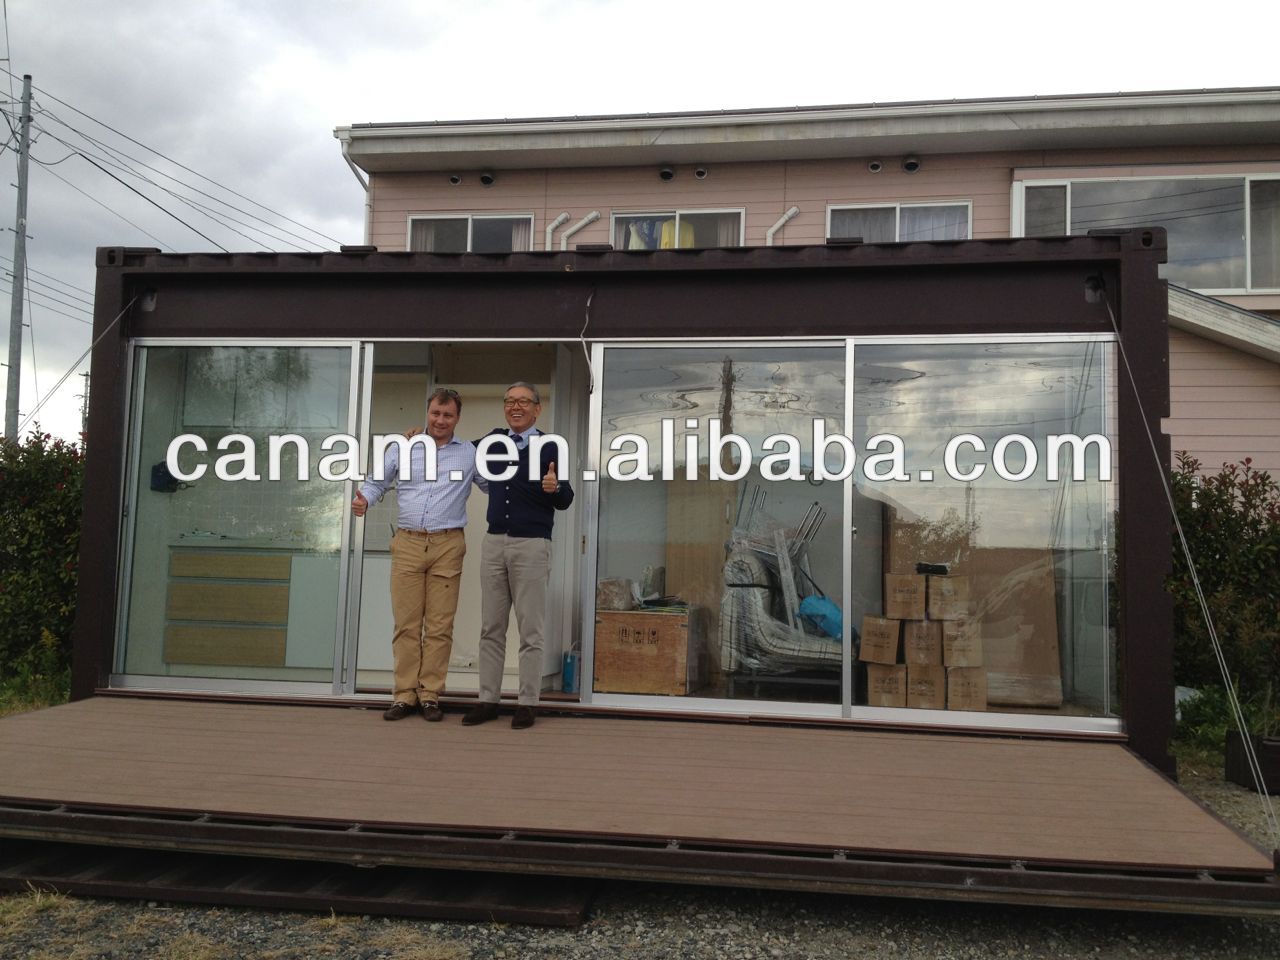 prefab container home prefabricated container house